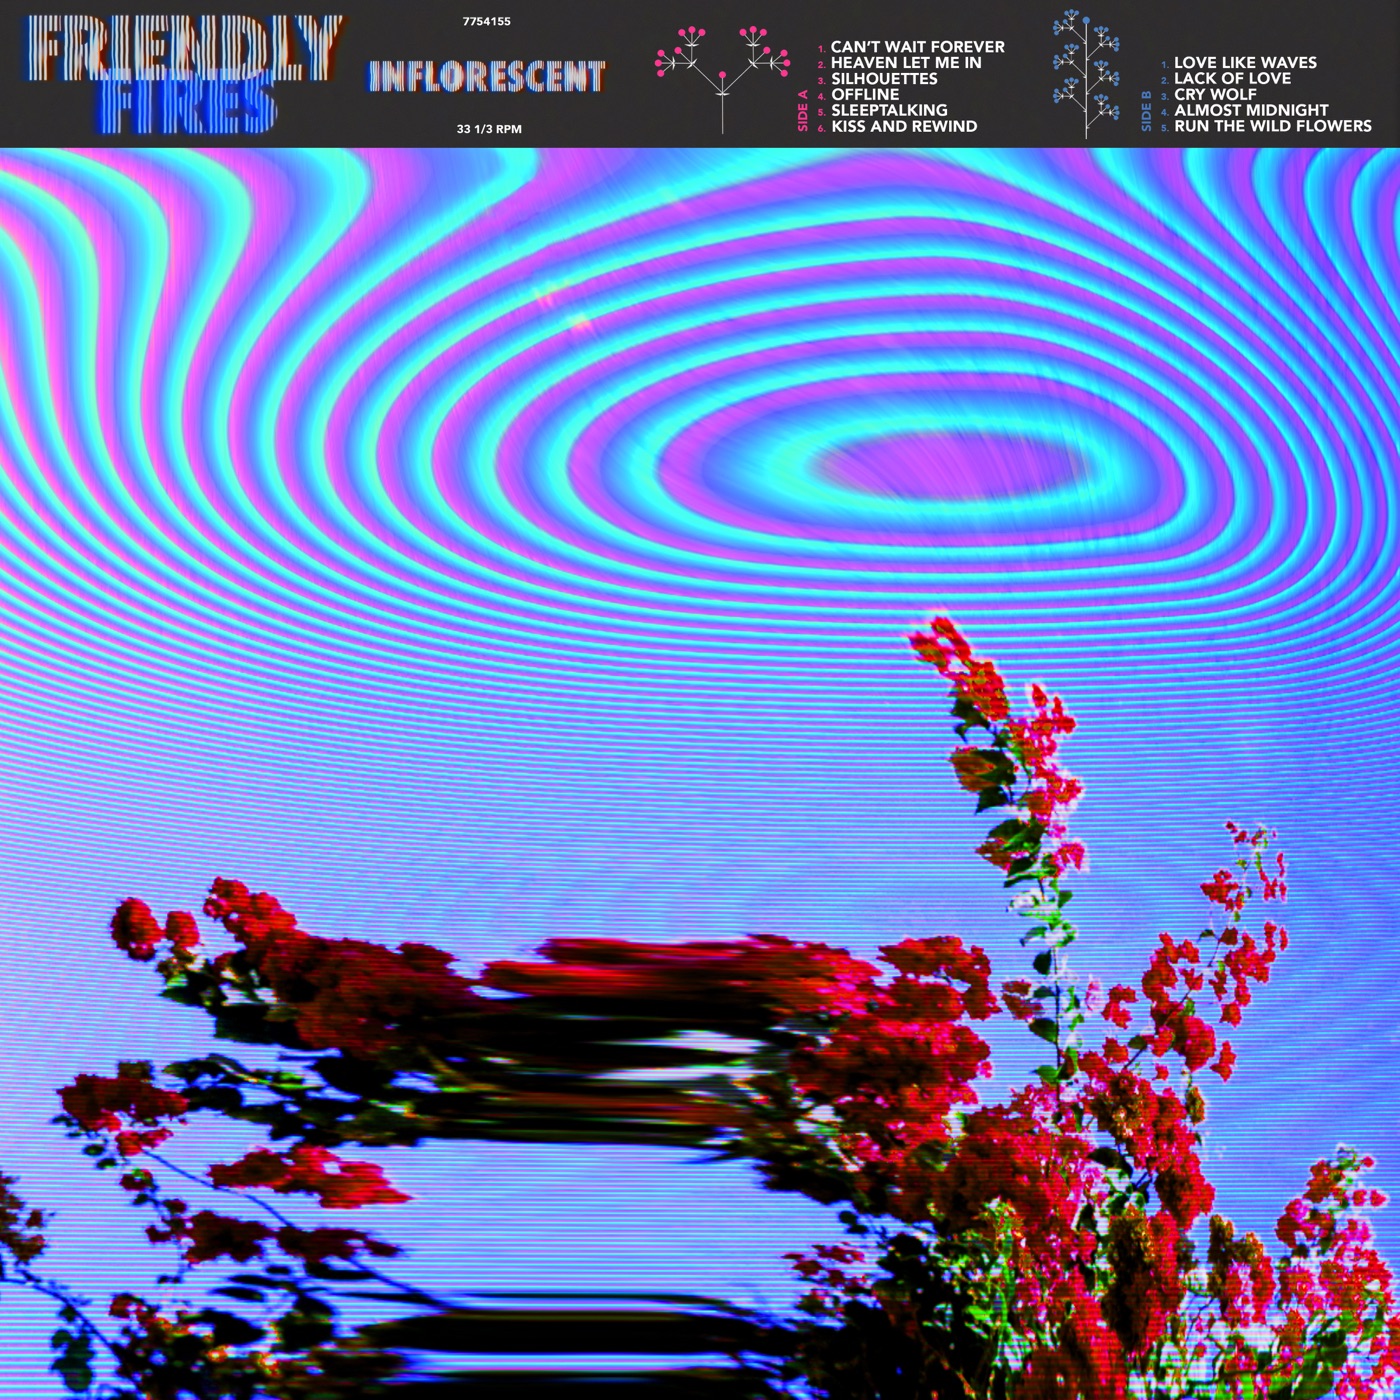 Inflorescent by Friendly Fires